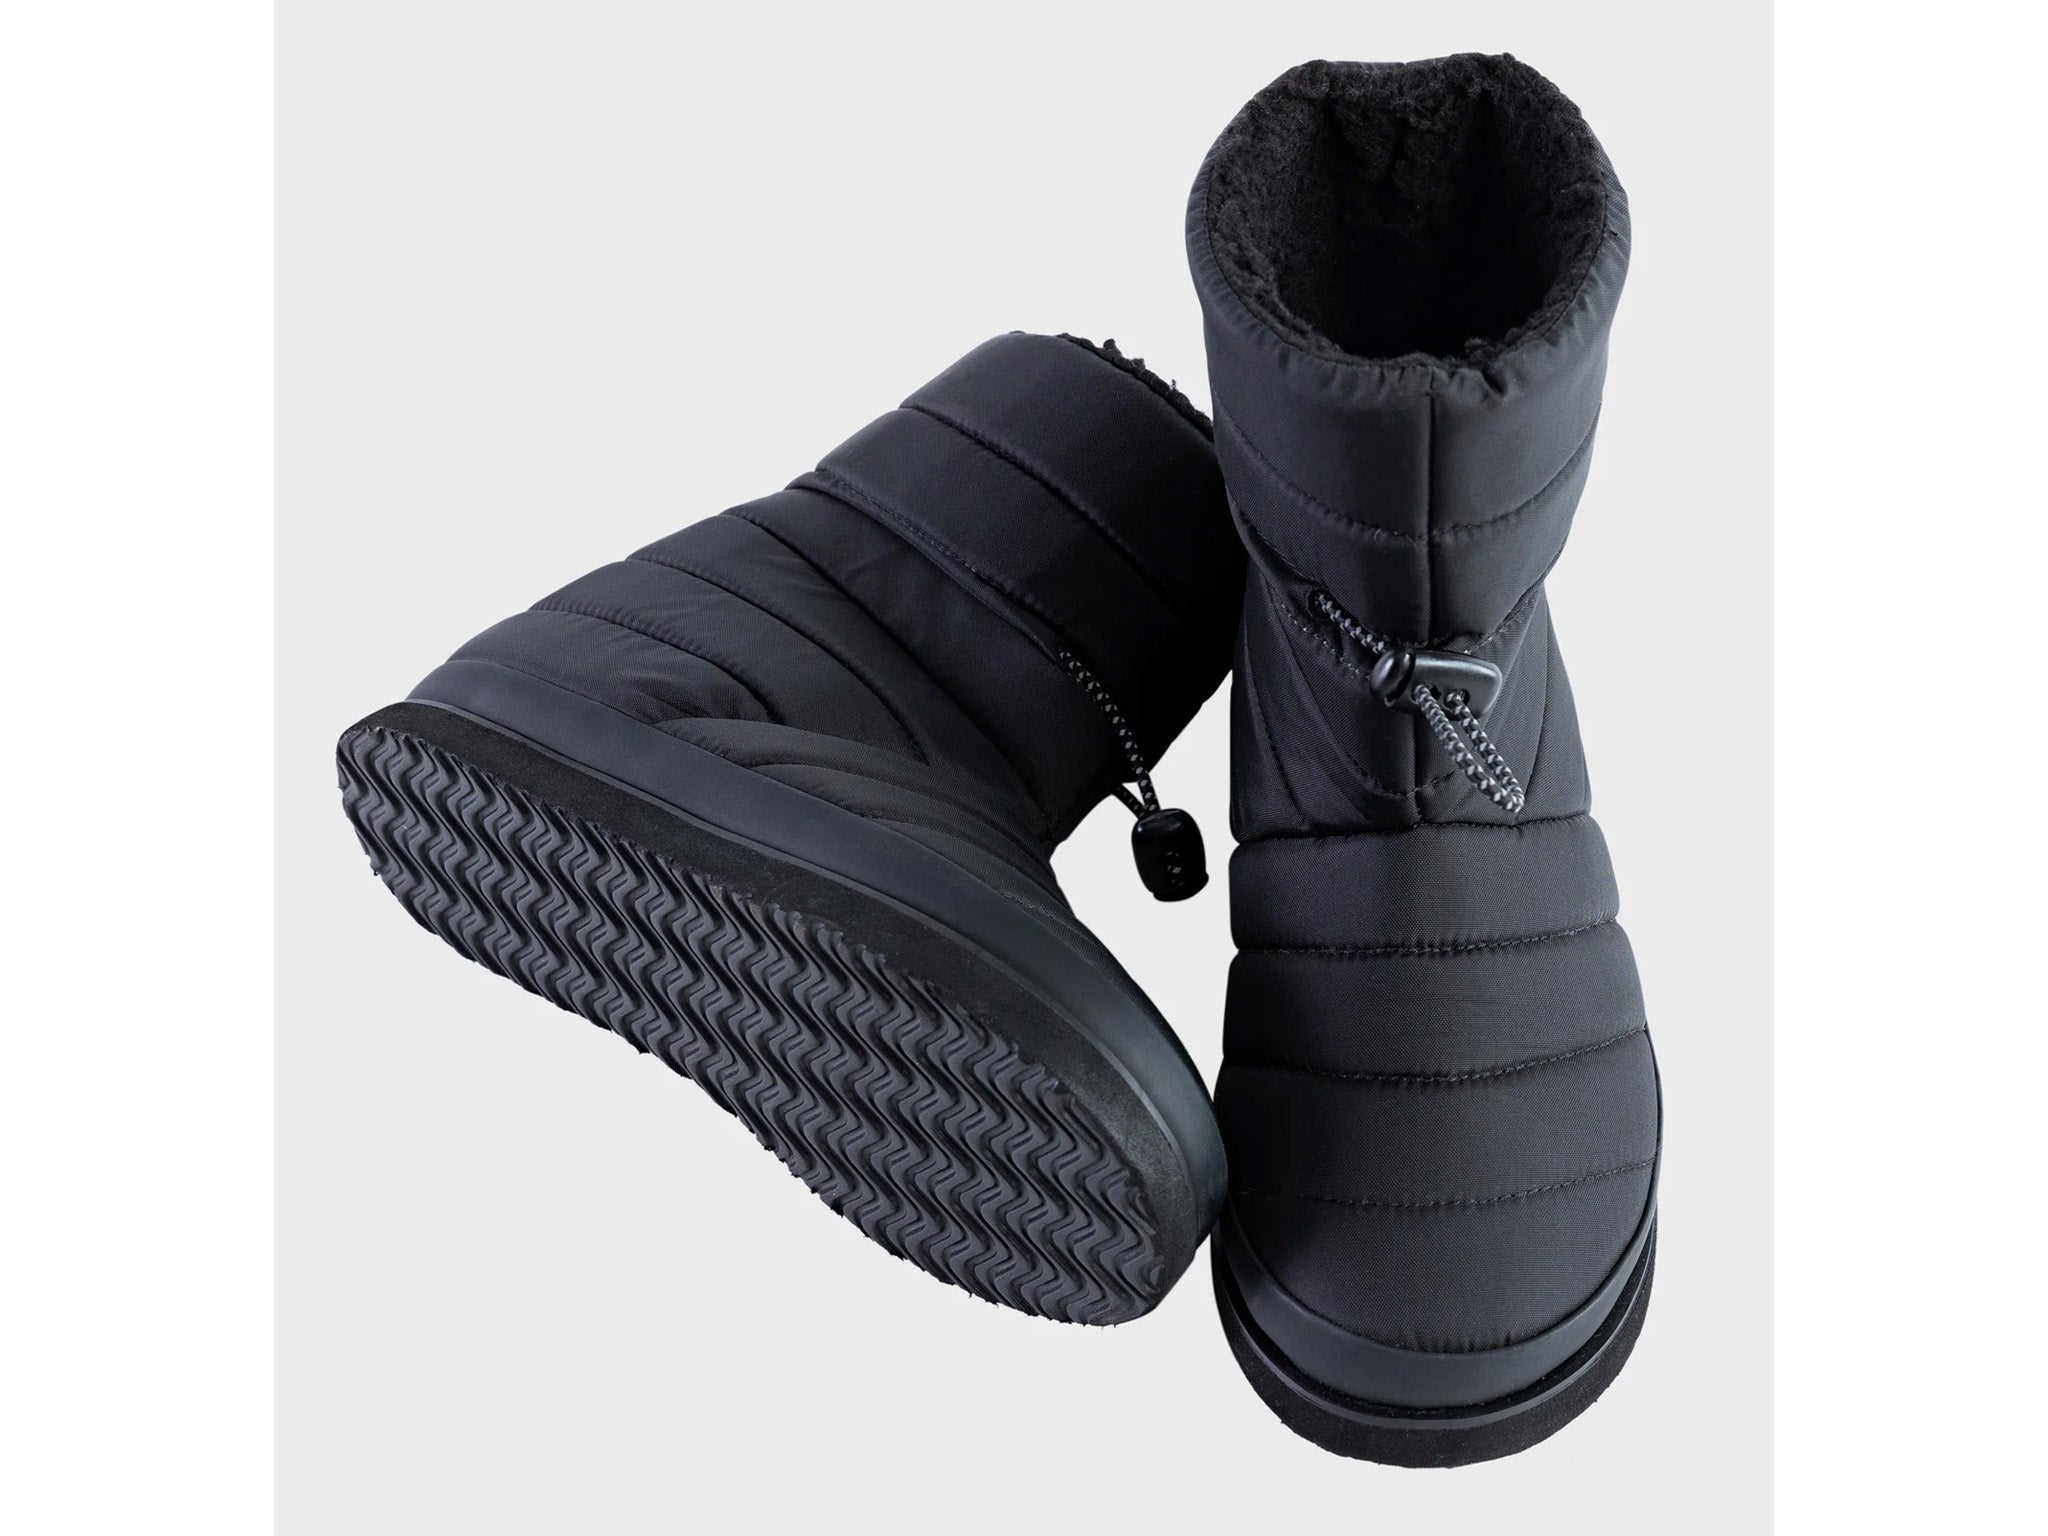 Dryrobe-Indybest-snowboots-review